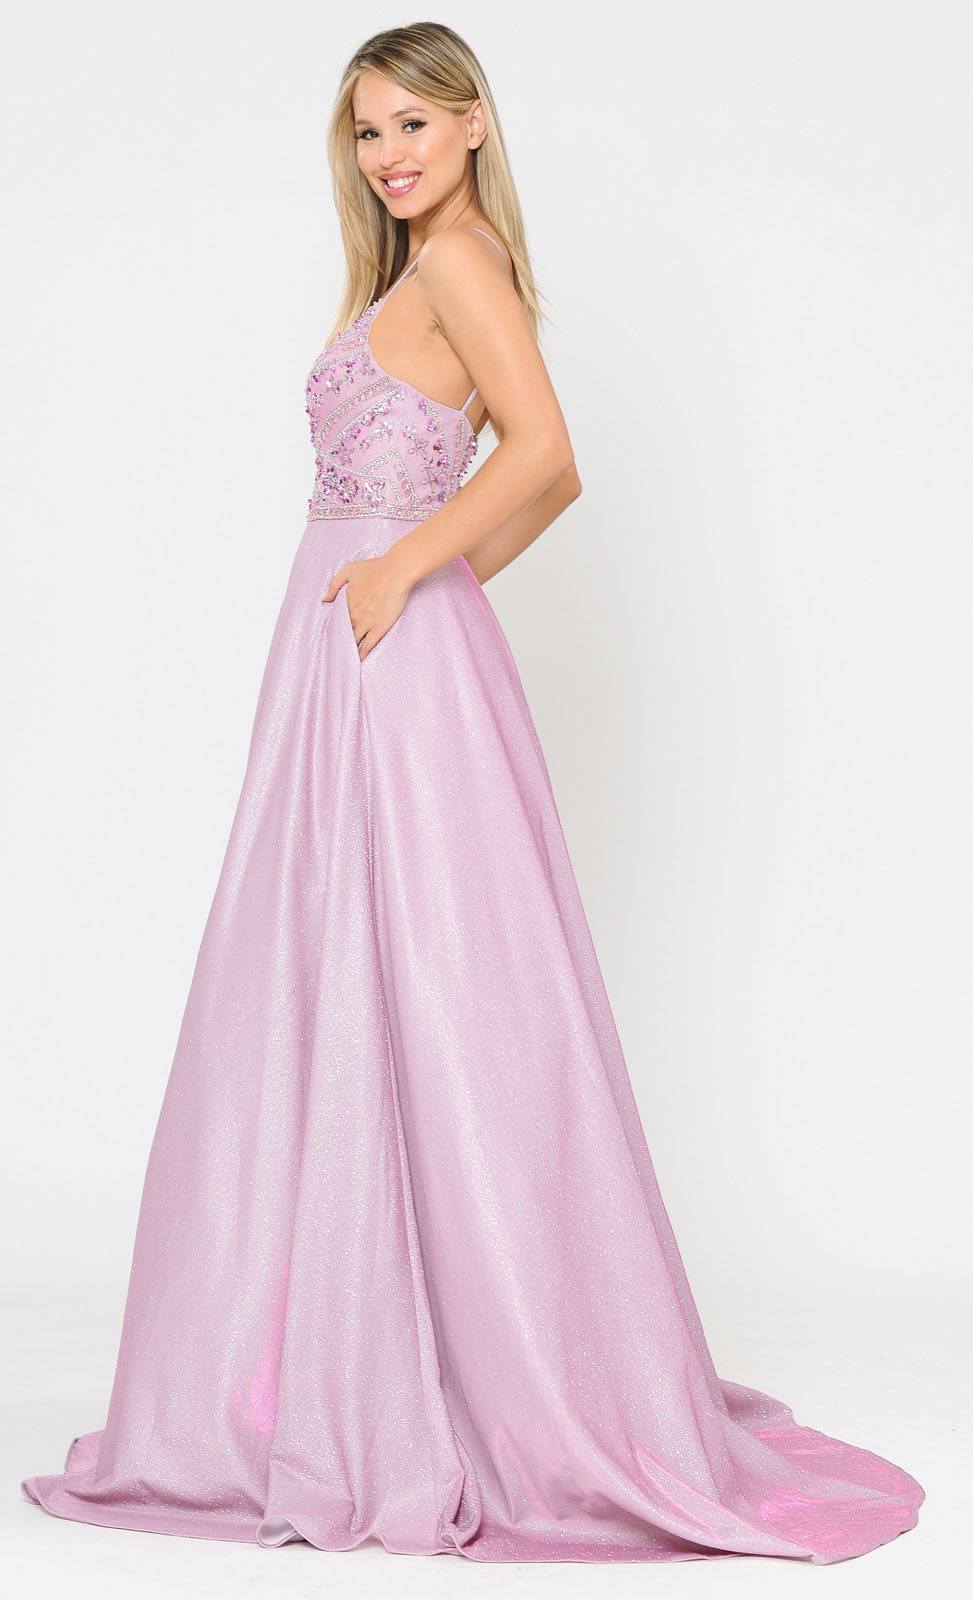 Poly USA 8414 Embellished Pink/Lilac Long Prom Dress with Pockets